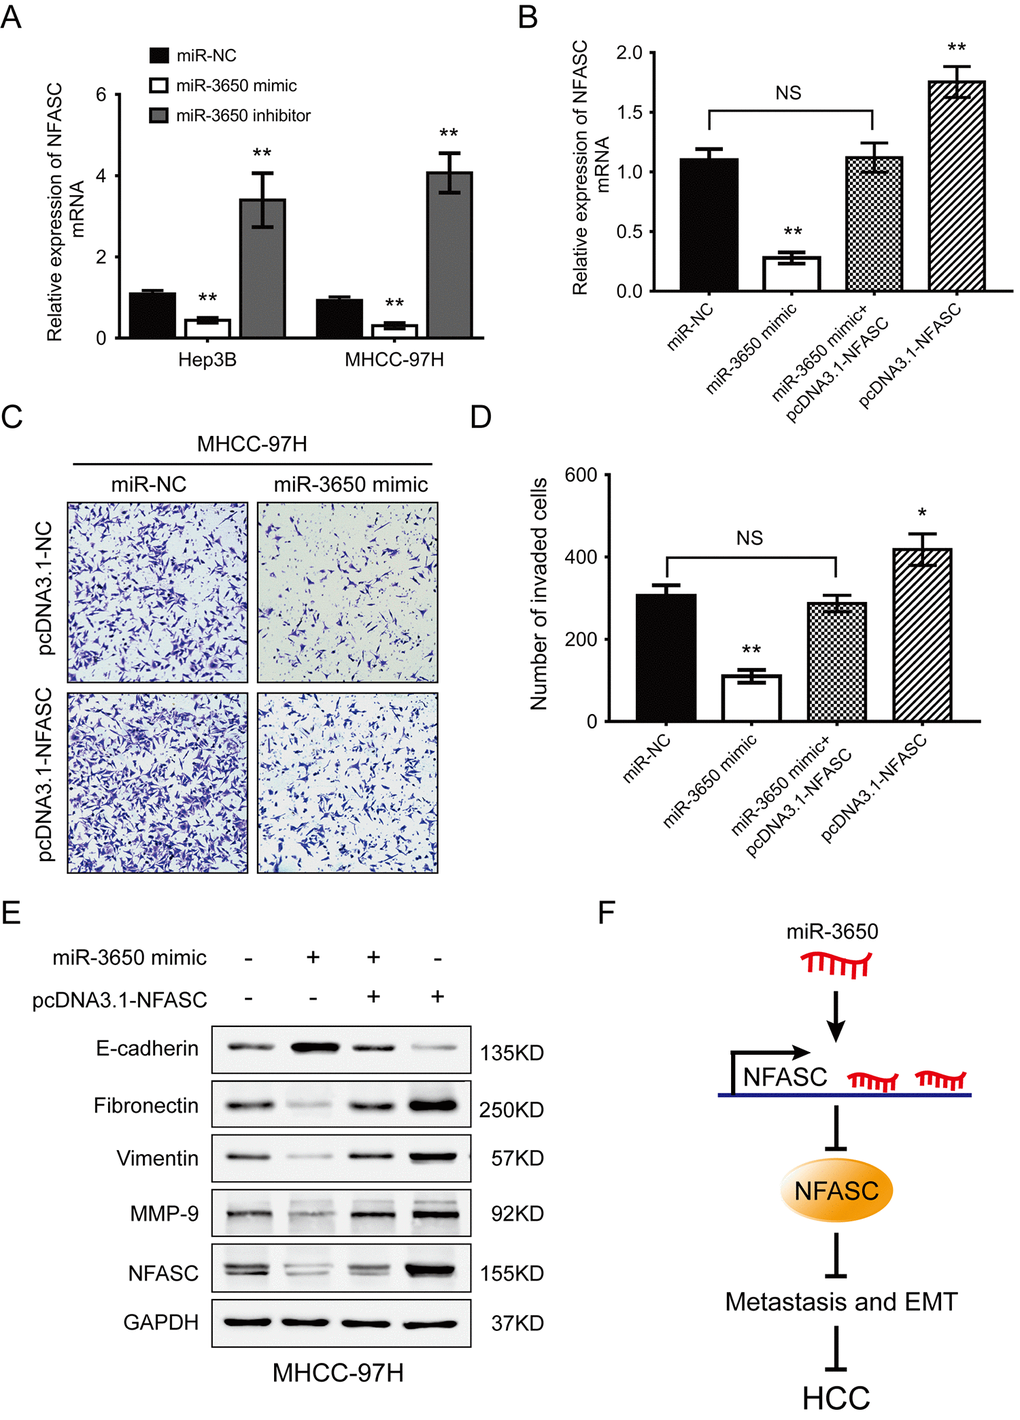 NFASC expression mediates the anti-metastatic effects of miR-3650 in HCC cells. (A) RT-PCR analysis confirmed that ectopic miR-3650 expression decreased NFASC expression while inhibition of miR-3650 increased NFASC expression. (B) NFASC mRNA level in MHCC-97H cells following overexpression of miR-3650 and/or NFASC expression vector lacking the 3’-UTR. Transwell assay of MHCC-97H cells after overexpression of miR-3650 and/or co-transfected with miR-NFASC expression vector lacking the 3’-UTR. Representative images (C) and quantifications (D) were shown. Error bars: mean ± SD (n=3). NS, no significant, * P P E) Western blots assay of the expression of EMT-related proteins (E-cadherin, Fibronectin, Vimentin and MMP-9 expression) and NFASC protein in MHCC-97H cells after transfection with miR-3650 mimic and/or pcDNA3.1-NFASC vector. (F) Schematic diagram of dysregulated miR-3650/NFASC axis in the inhibition of HCC metastasis.